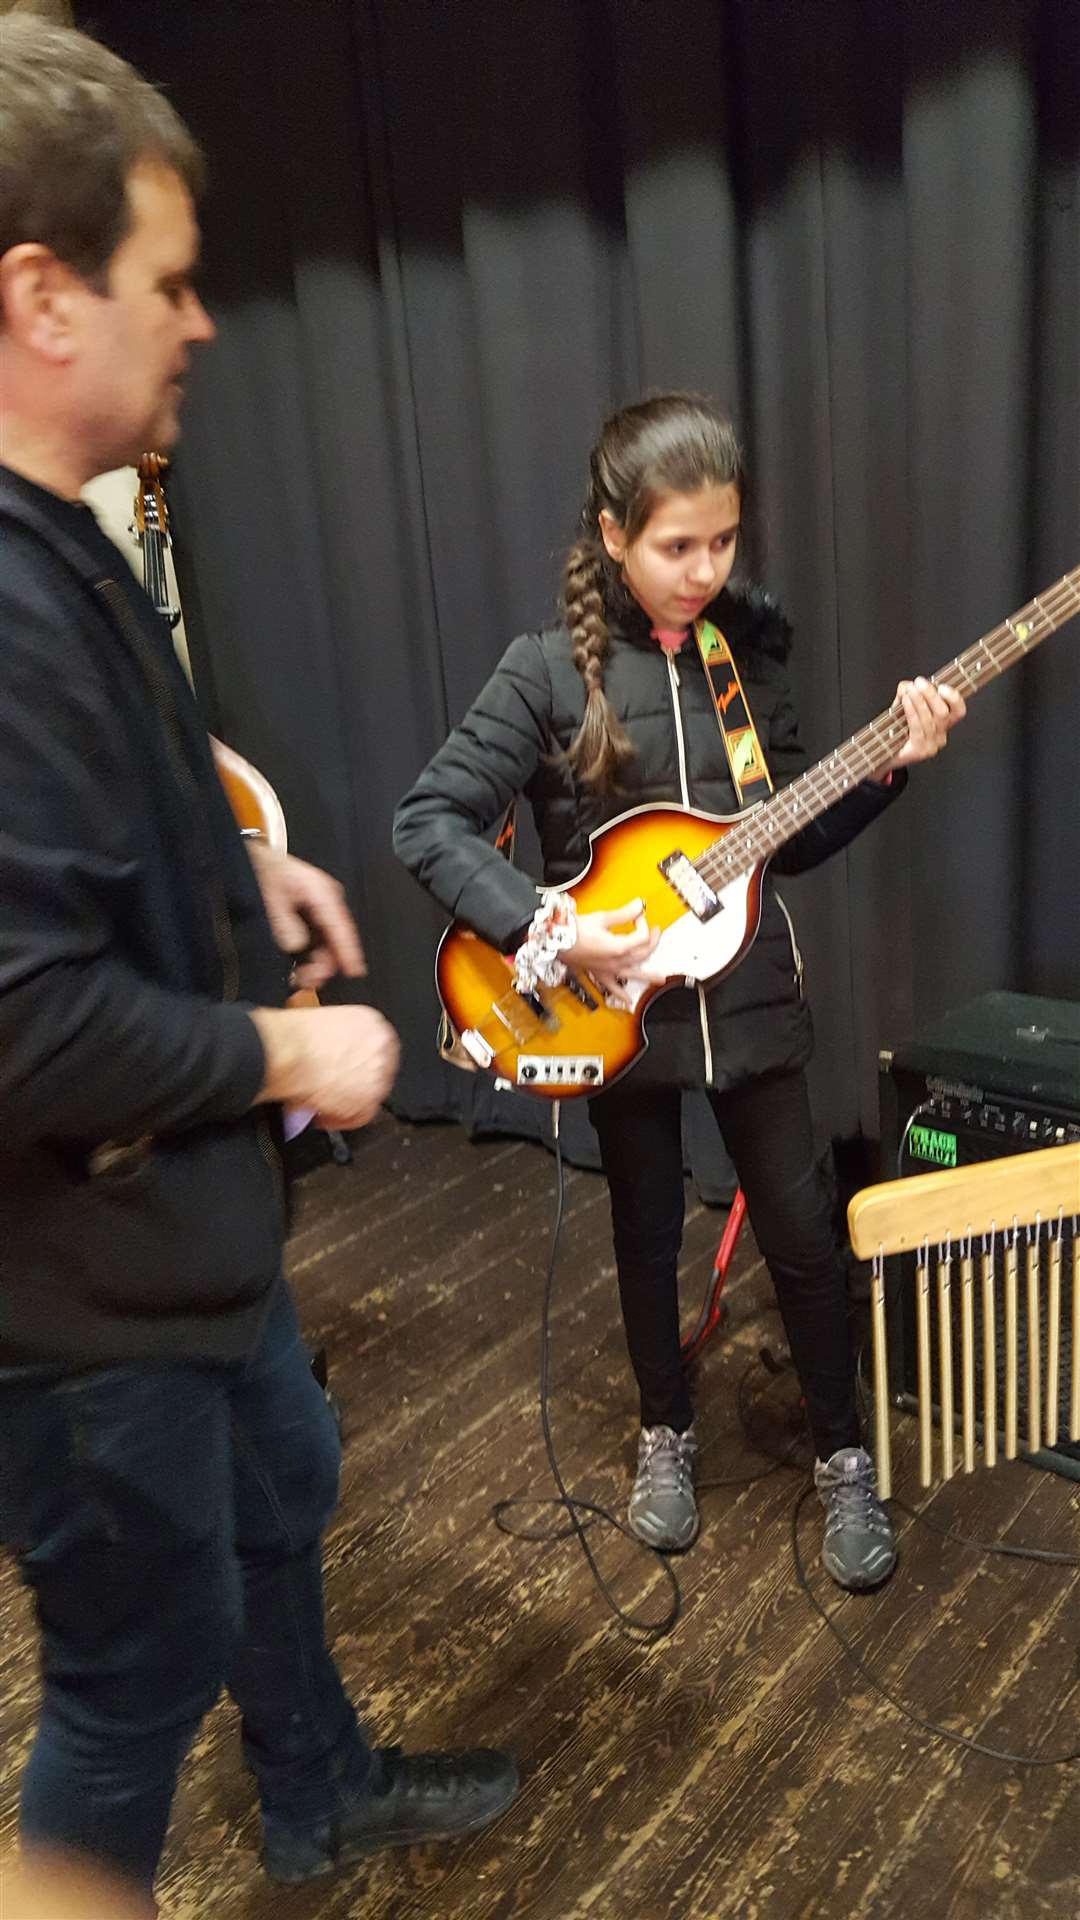 Getting to grips with a bass guitar.